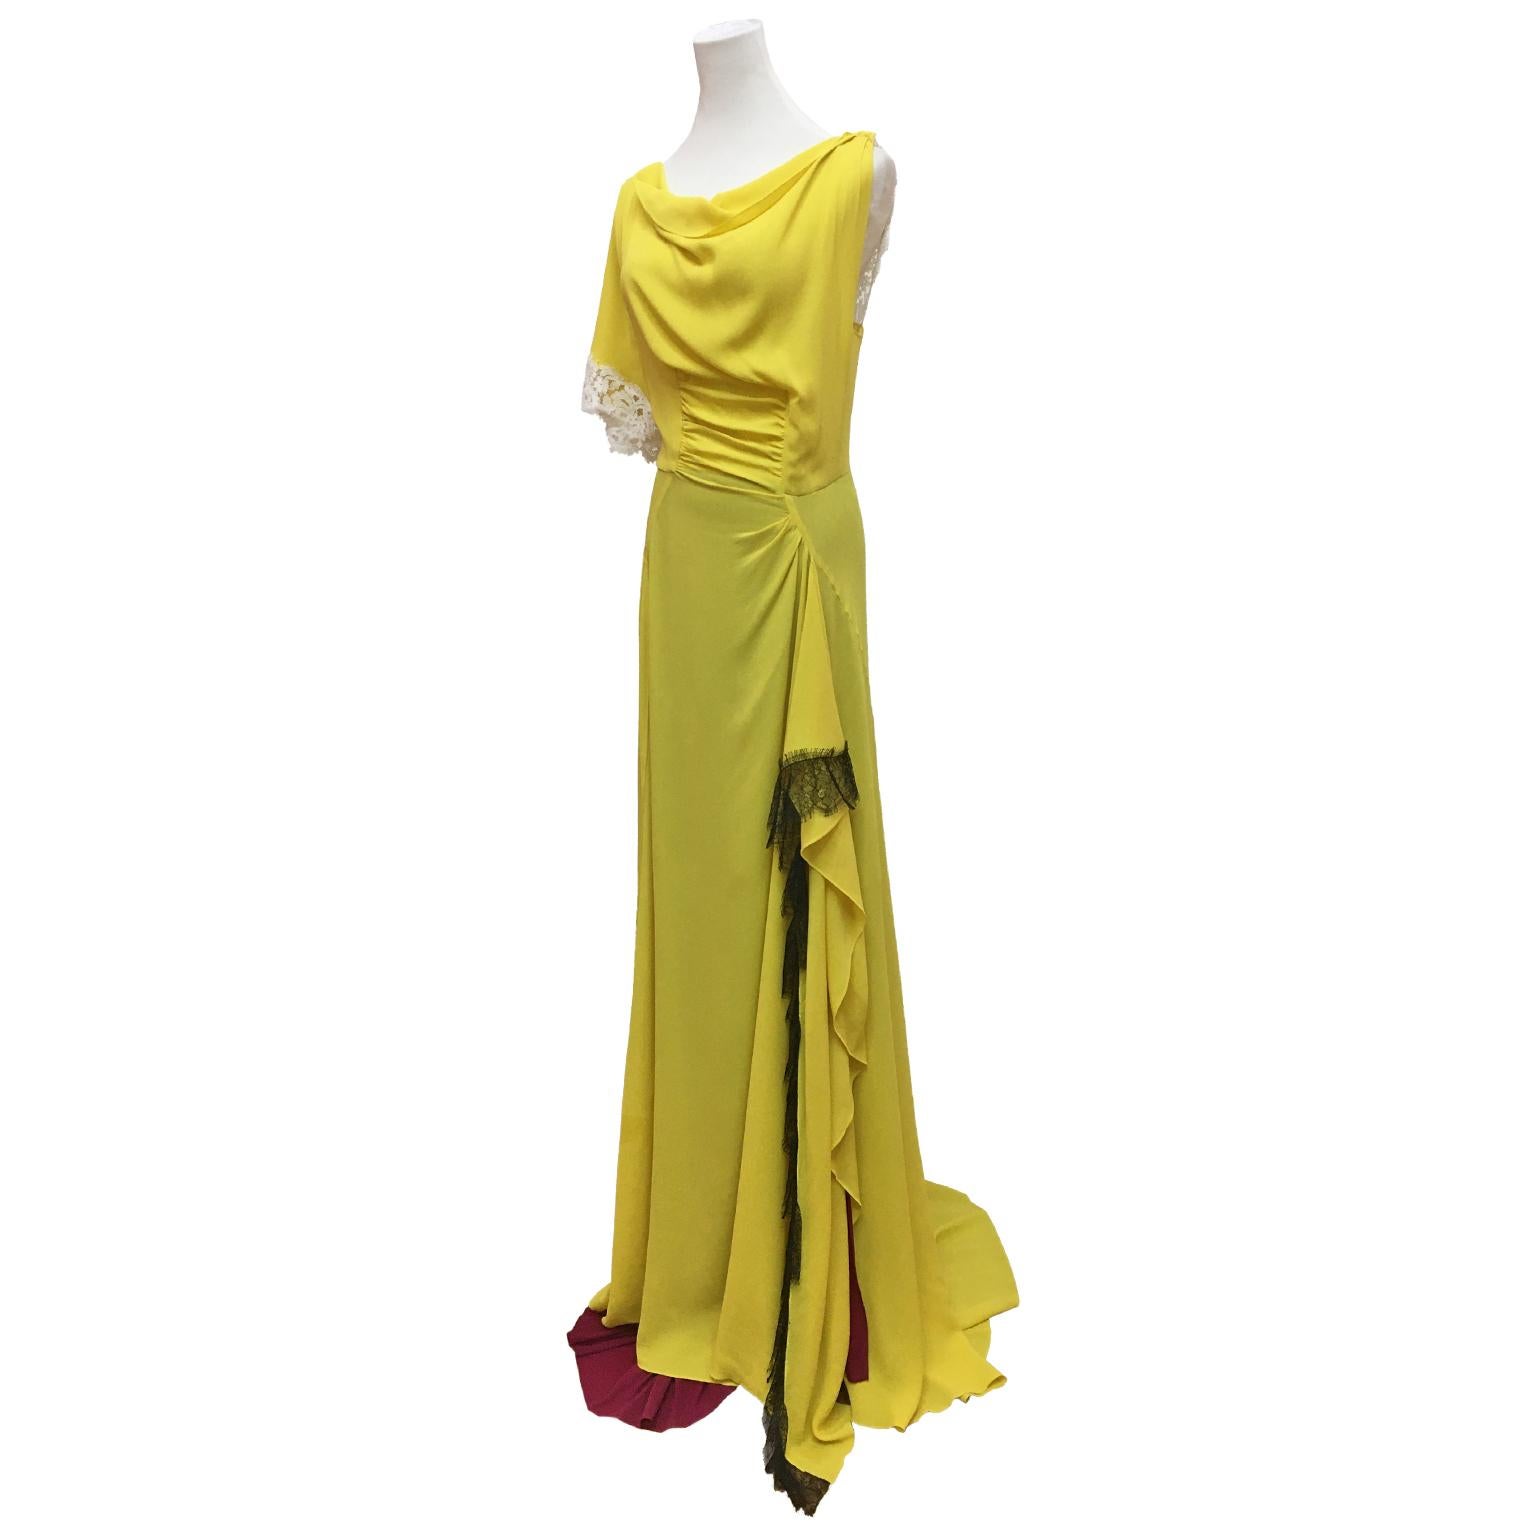 This is an outstanding silk gown sample from Olivier Theyskens for Nina Ricci circa 2010. This full length and train asymmetric dress has dramatic statement with contrasted lining in Bordeaux with Theyskens signature yellow -  with black lace trim.